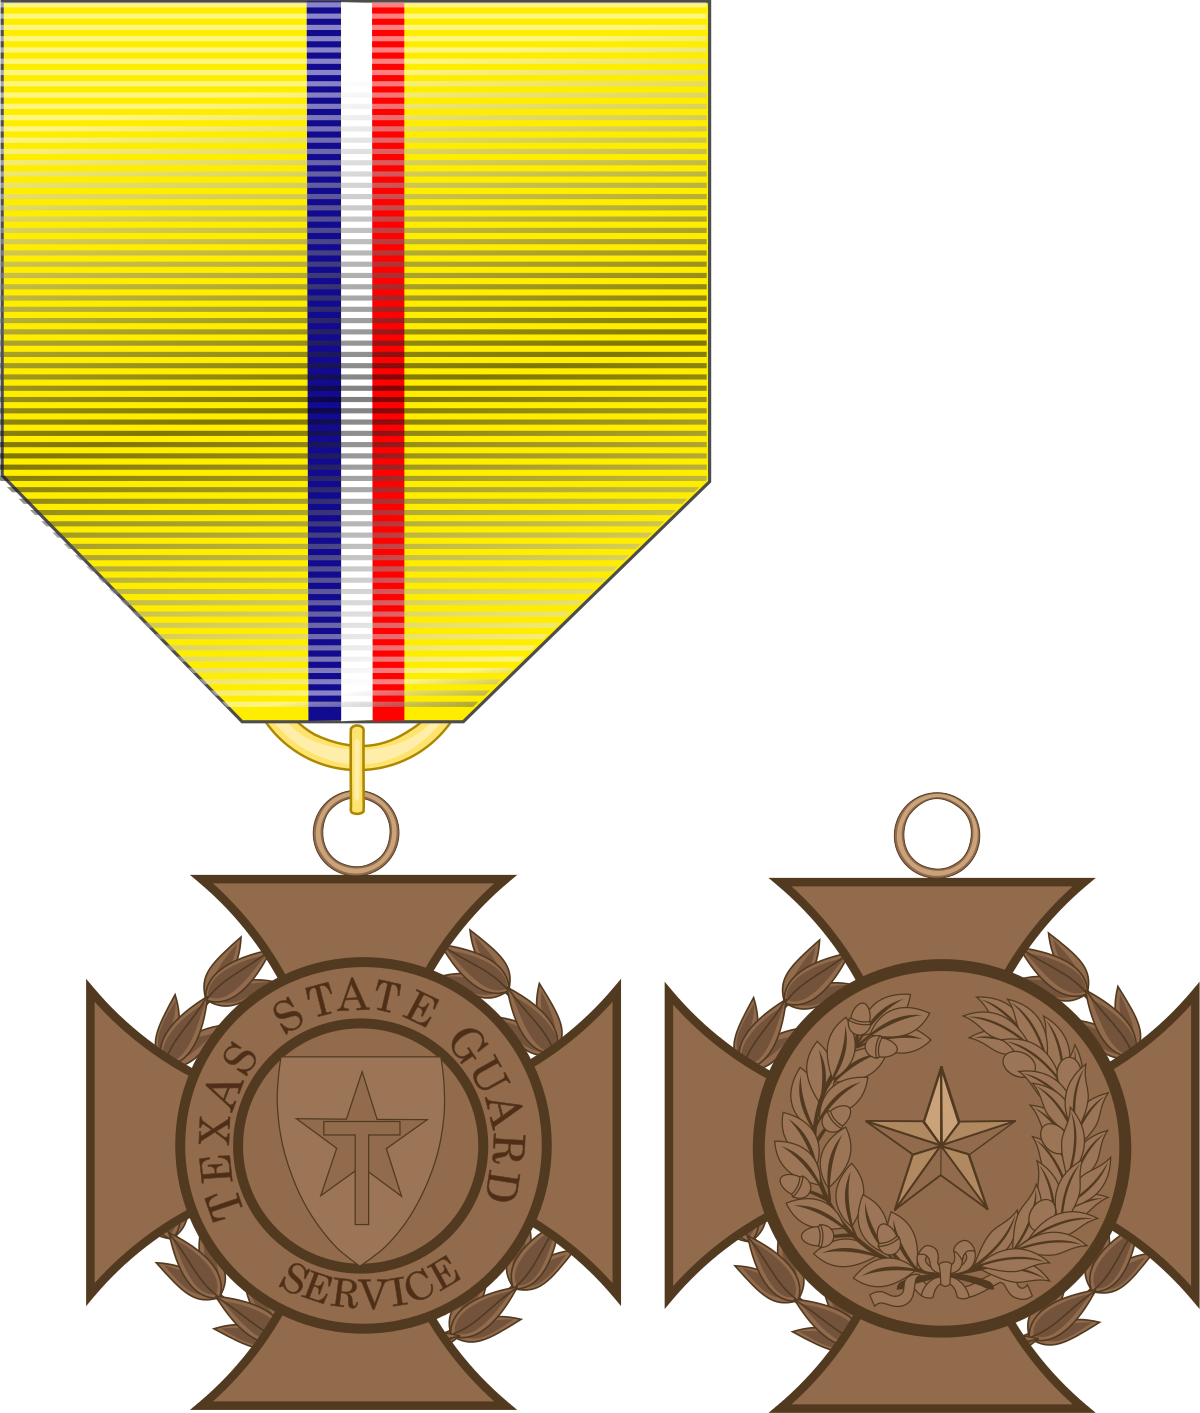 Texas state guard service. Medal clipart honorable